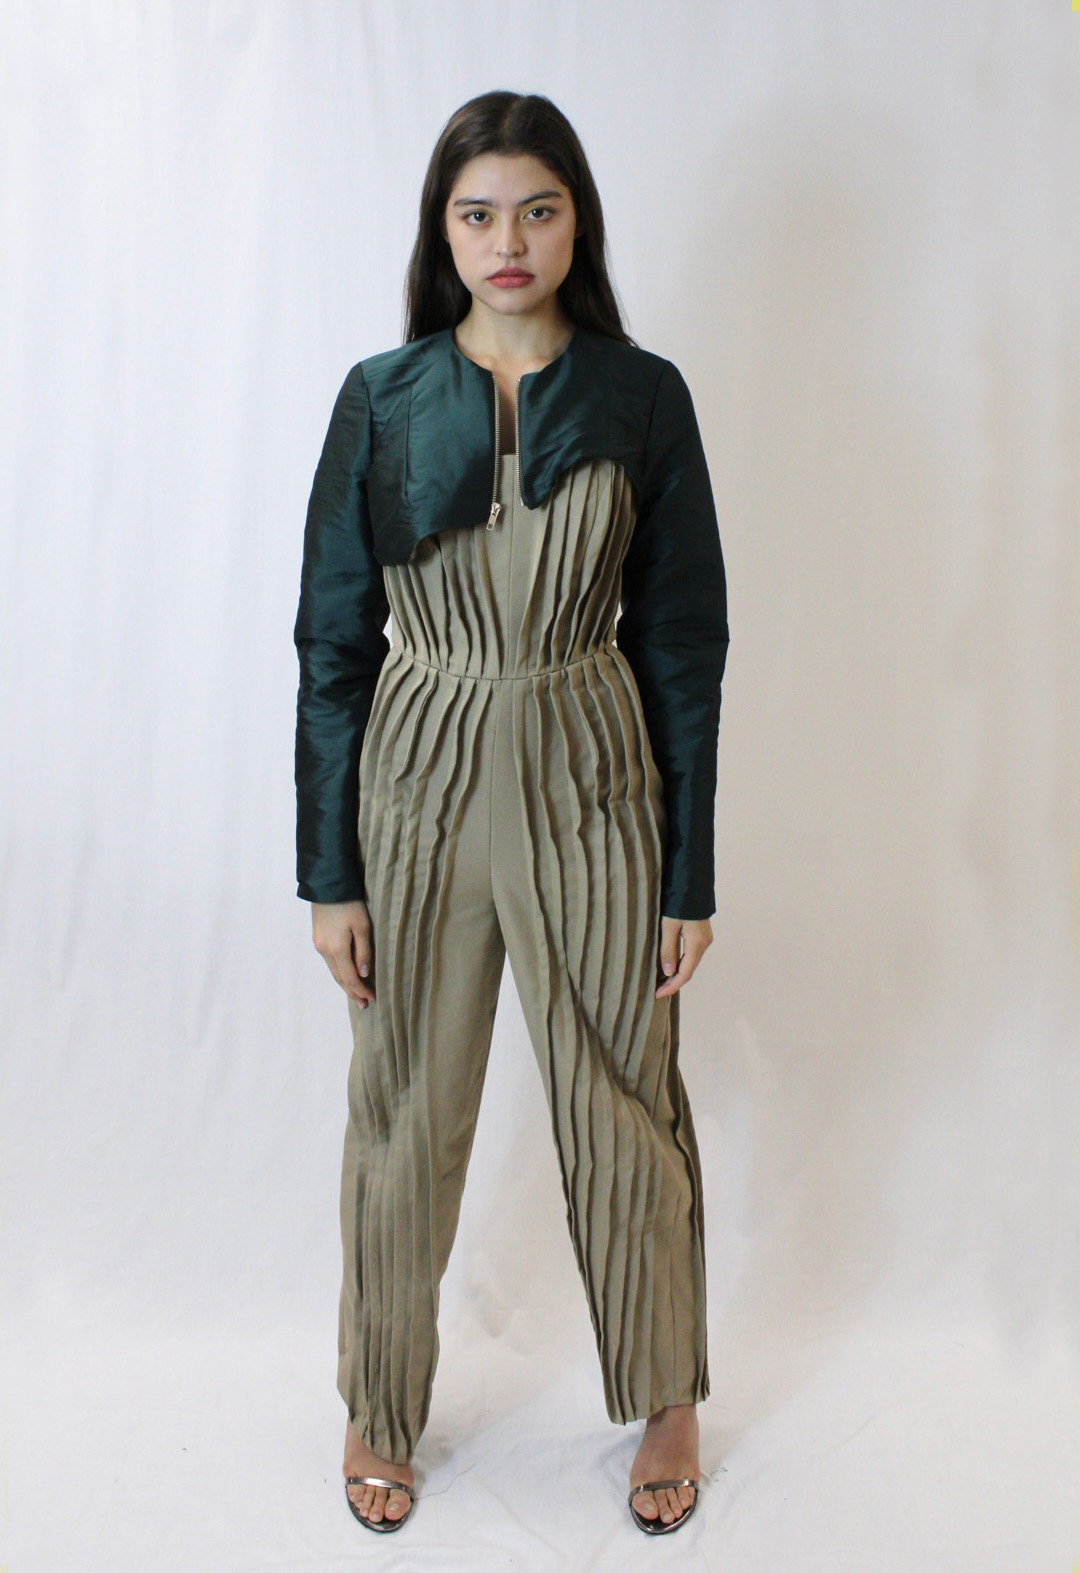 This is a strapless pleated jumpsuit complemented with an asymmetrical bolero jacket.